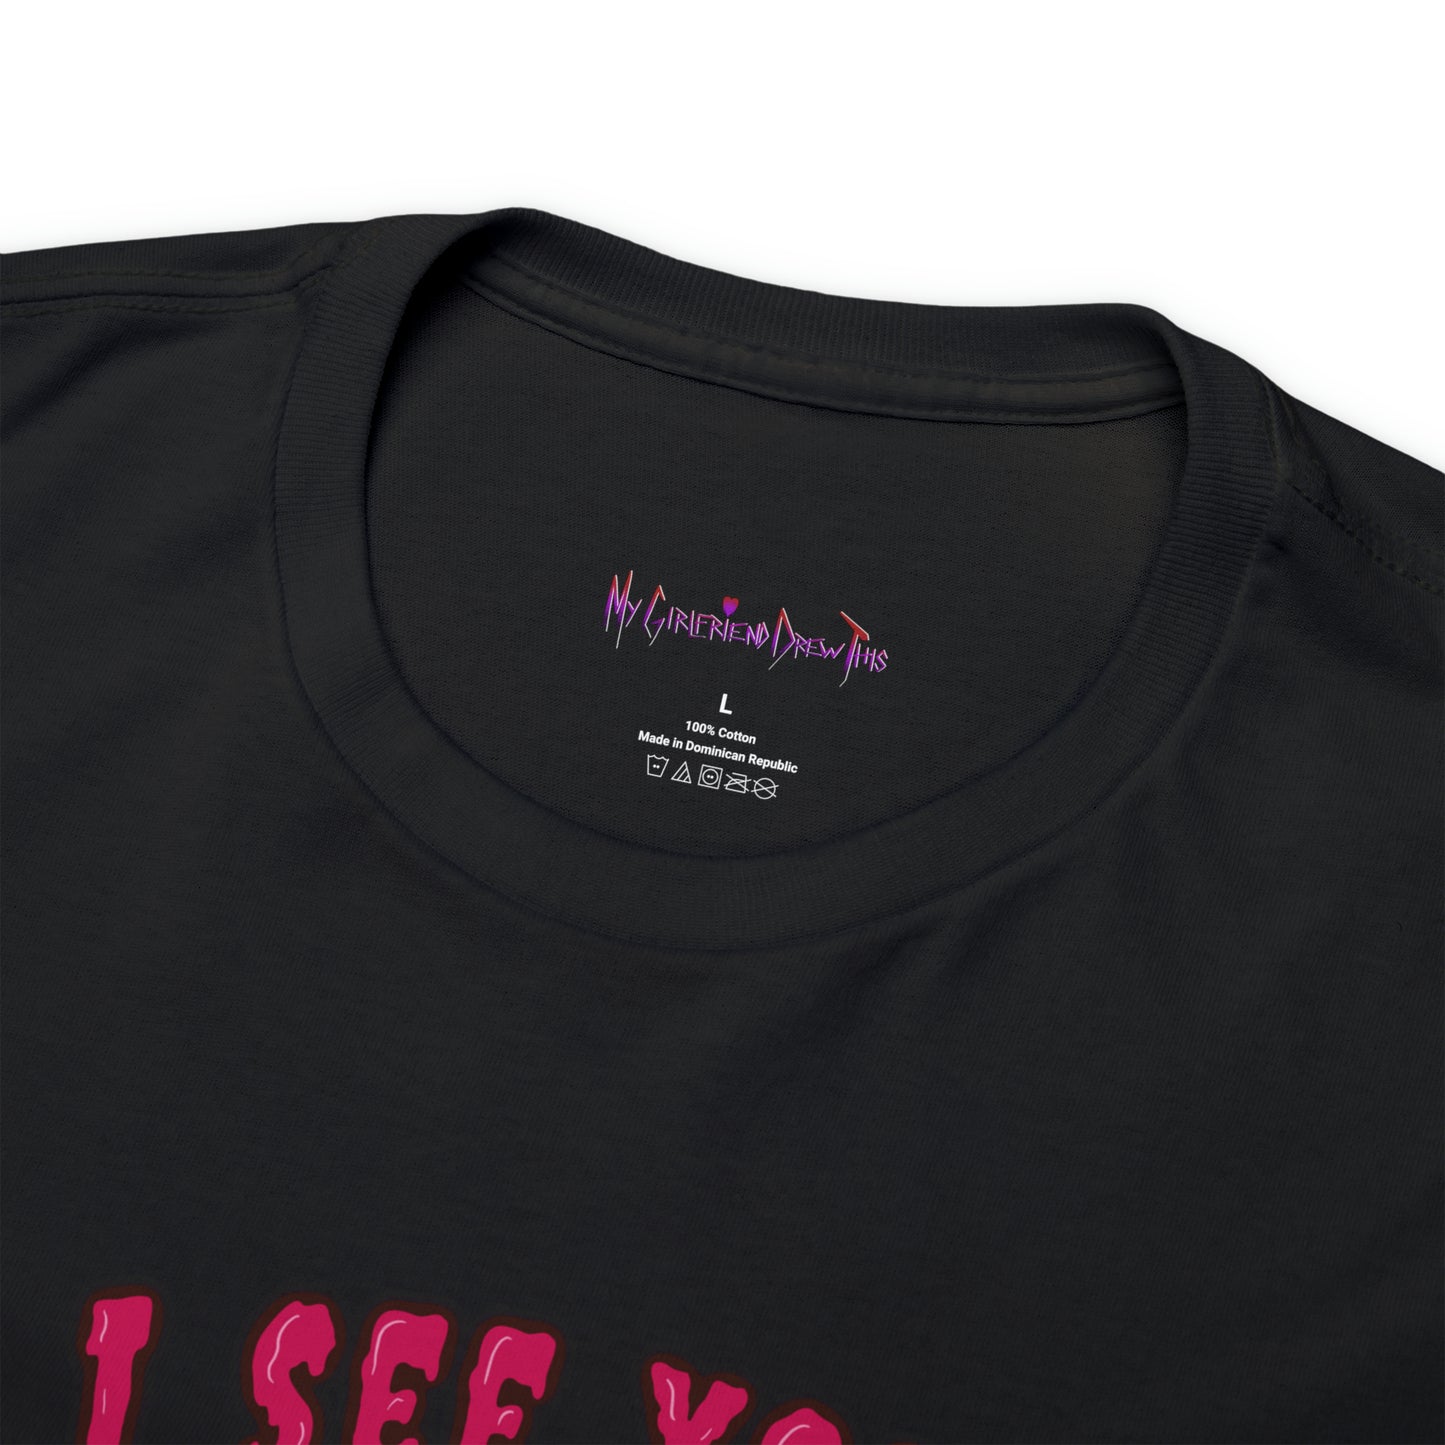 "I See You Sinning" Cotton Tee